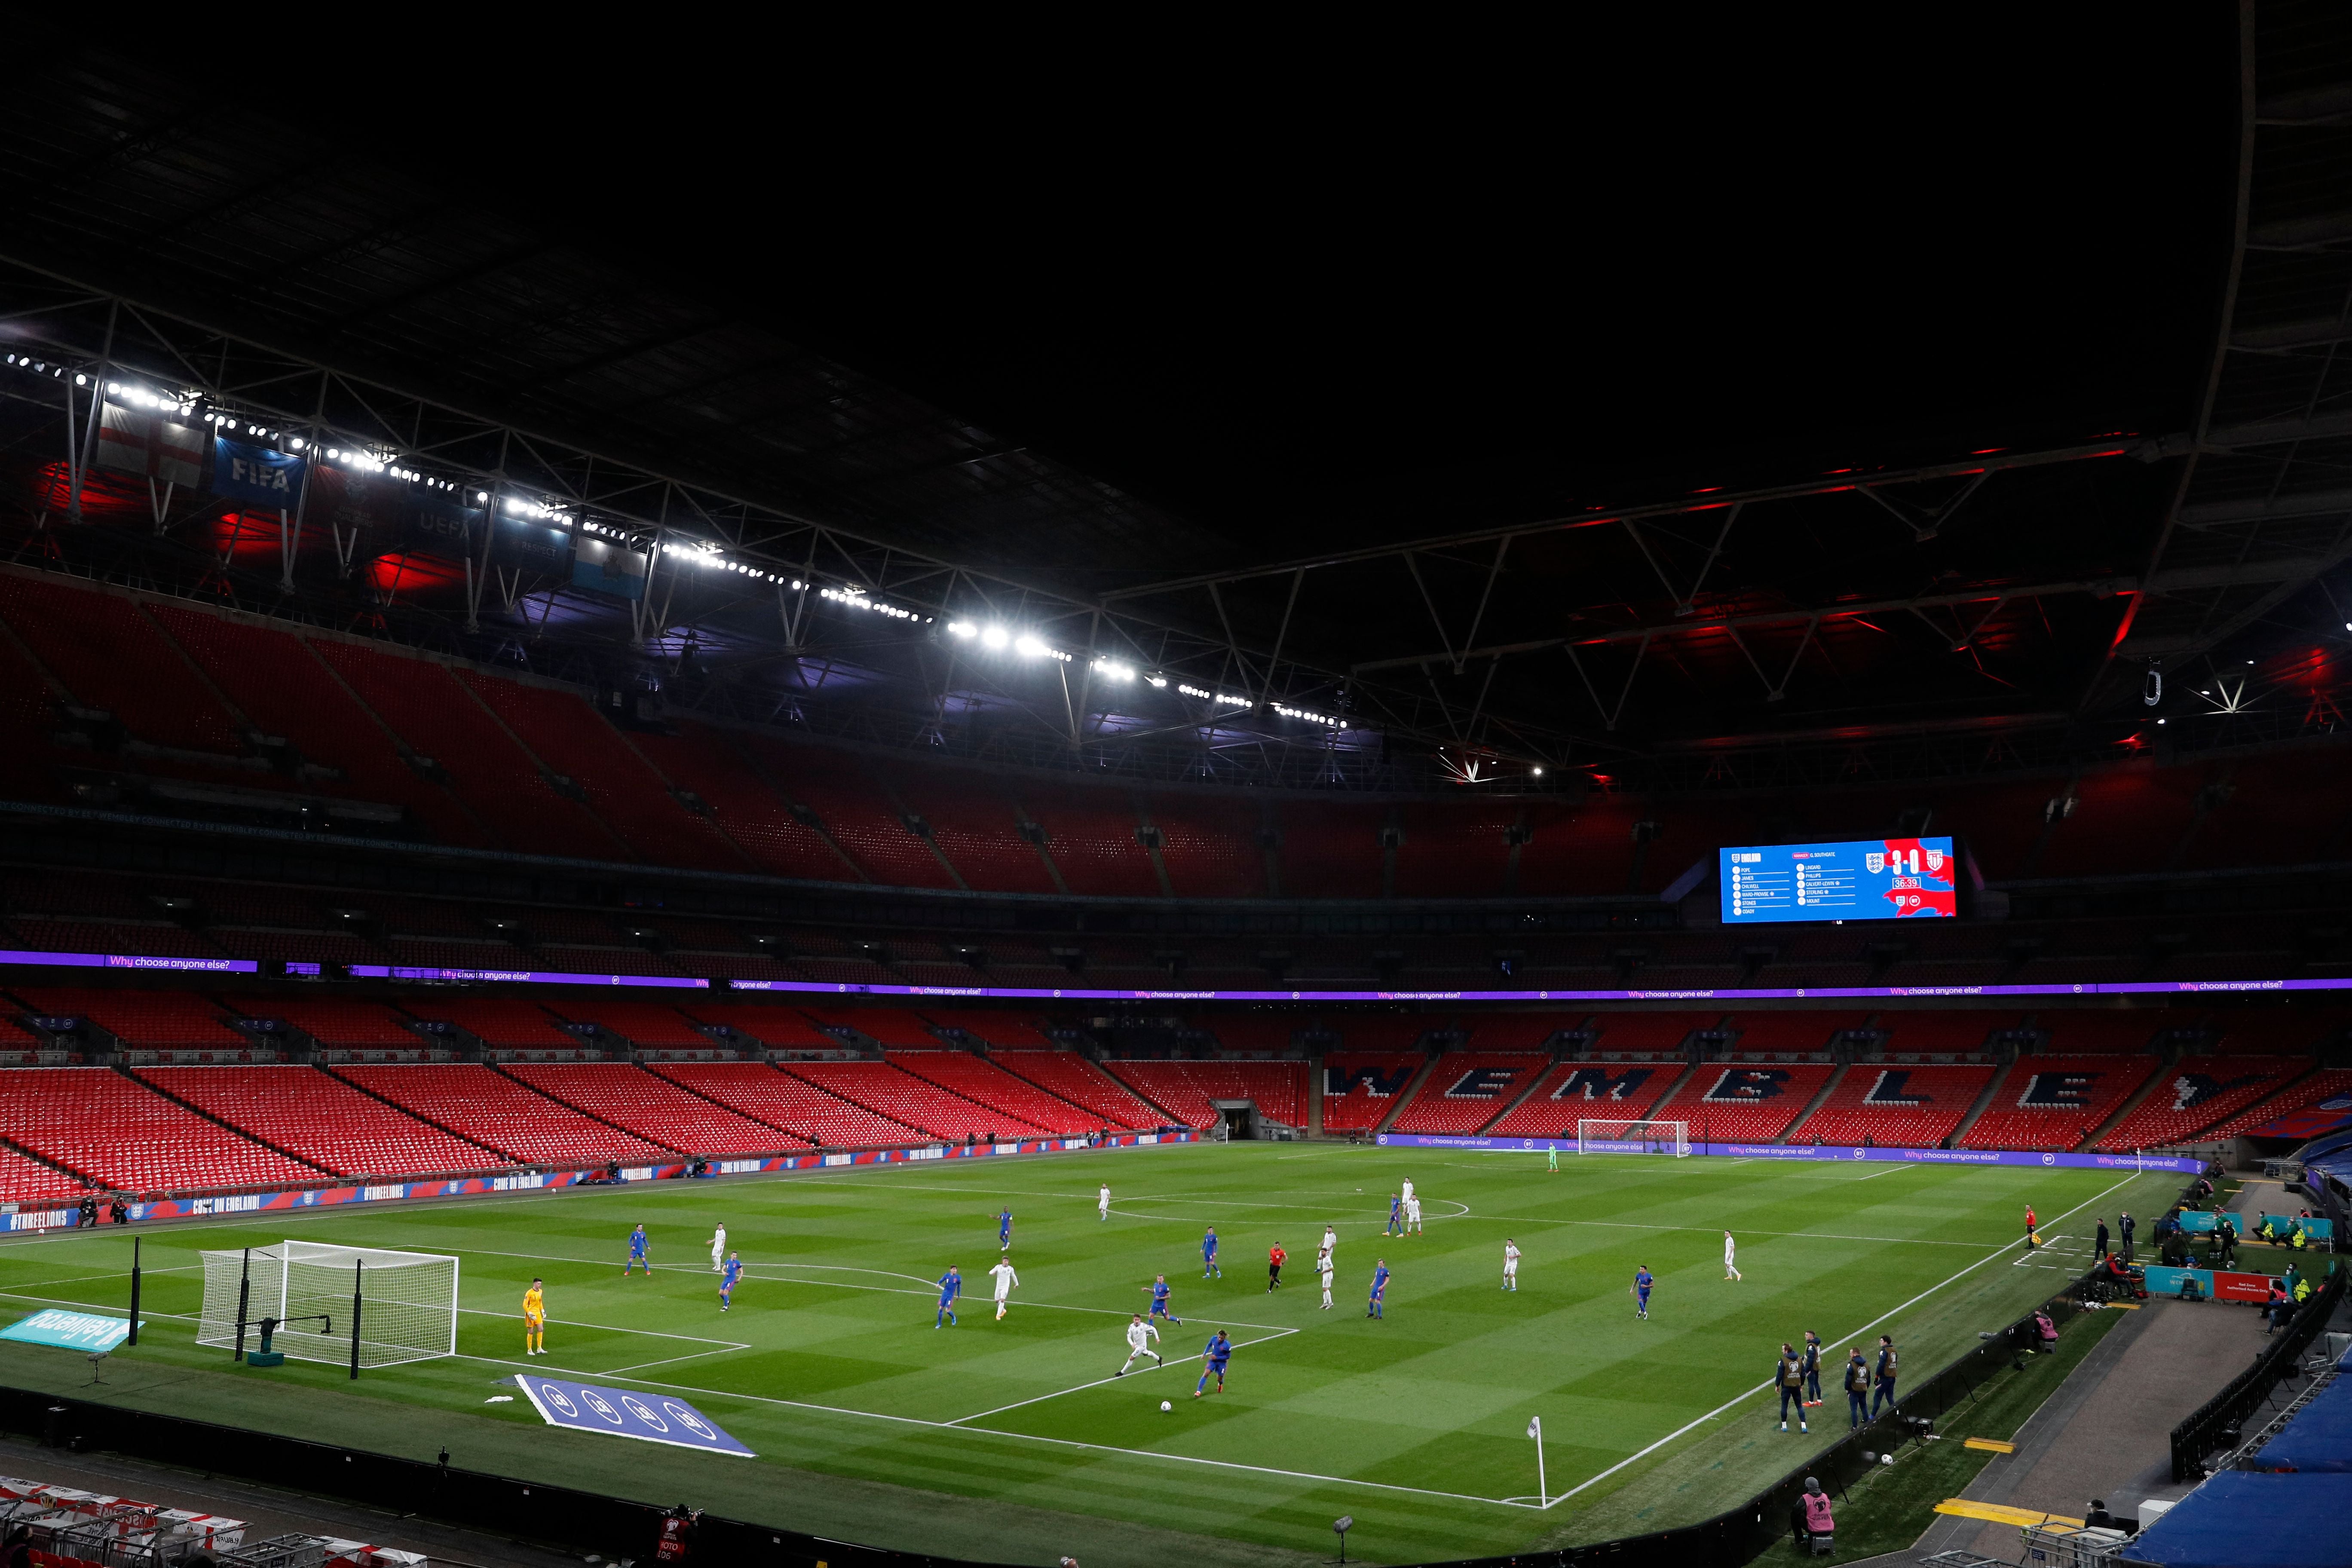 Wembley Stadium will host the semi-finals and final of the tournament